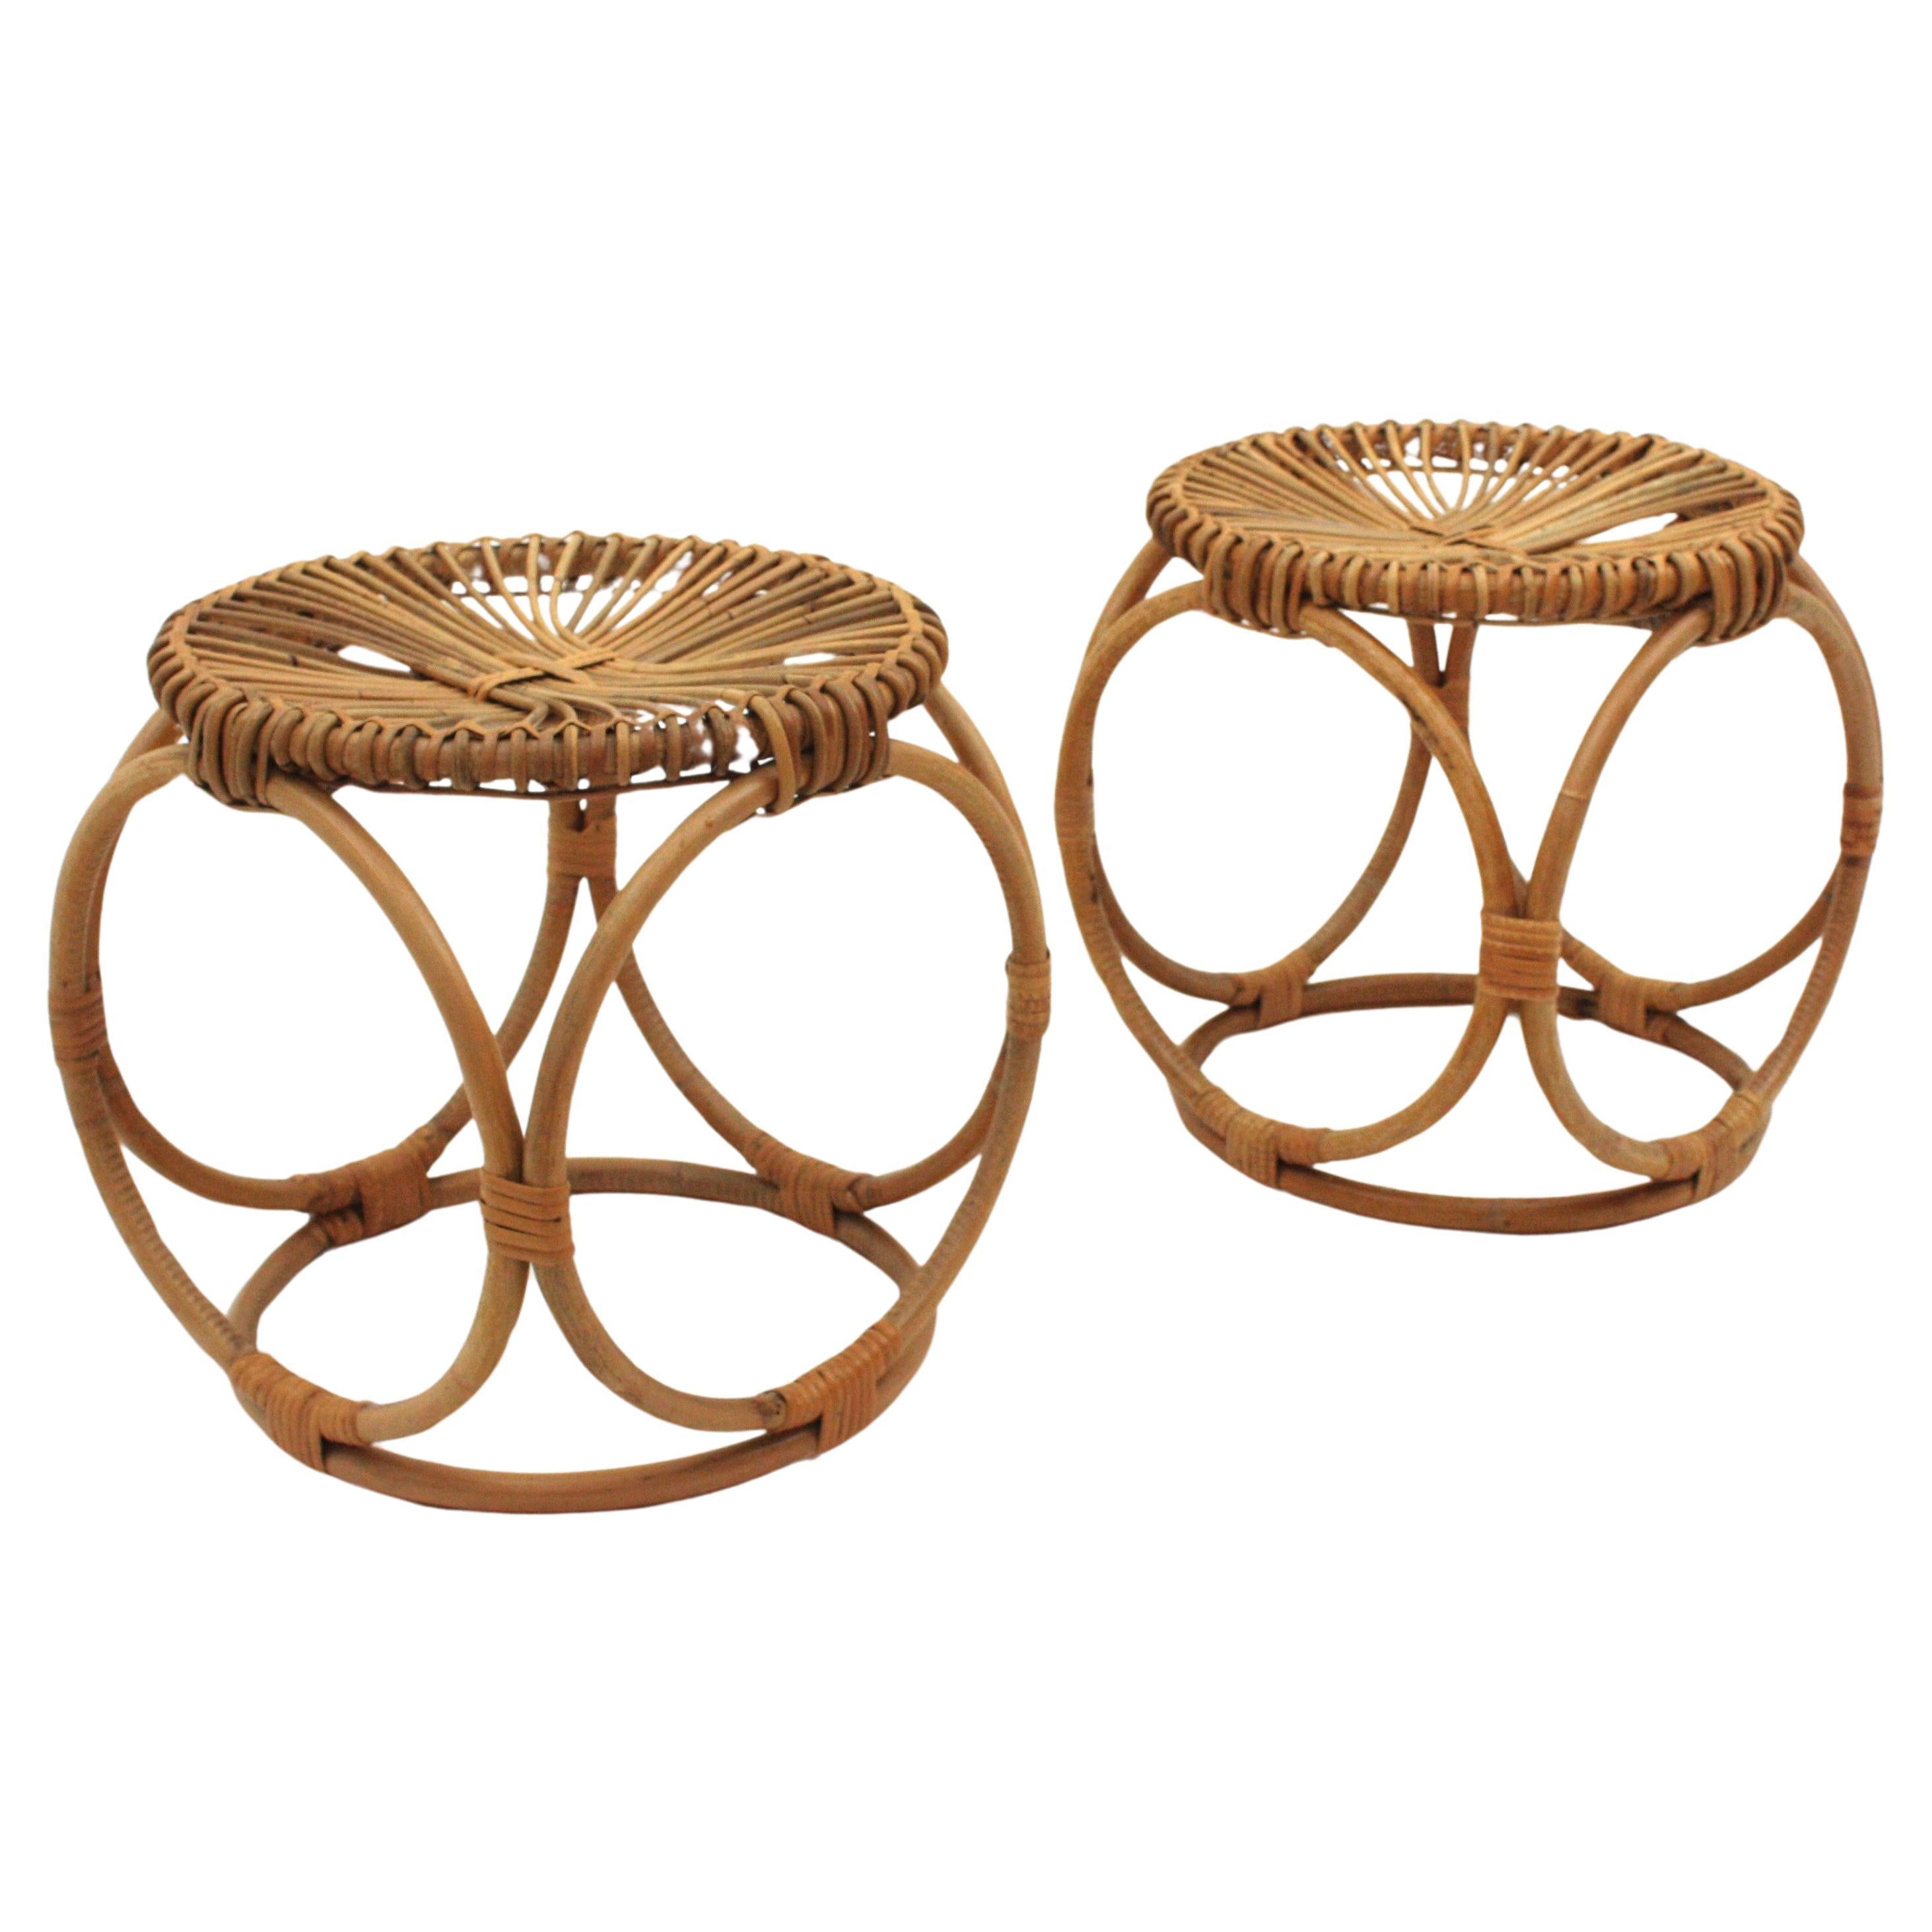 Italian midcentury rattan and bamboo stools / side tables, 1950s-1960s
Handcrafted
These eye-catching stools / footstools can be used as end tables, side tables or nightstands.
They have a nice construction and a clean design inspired in Michael